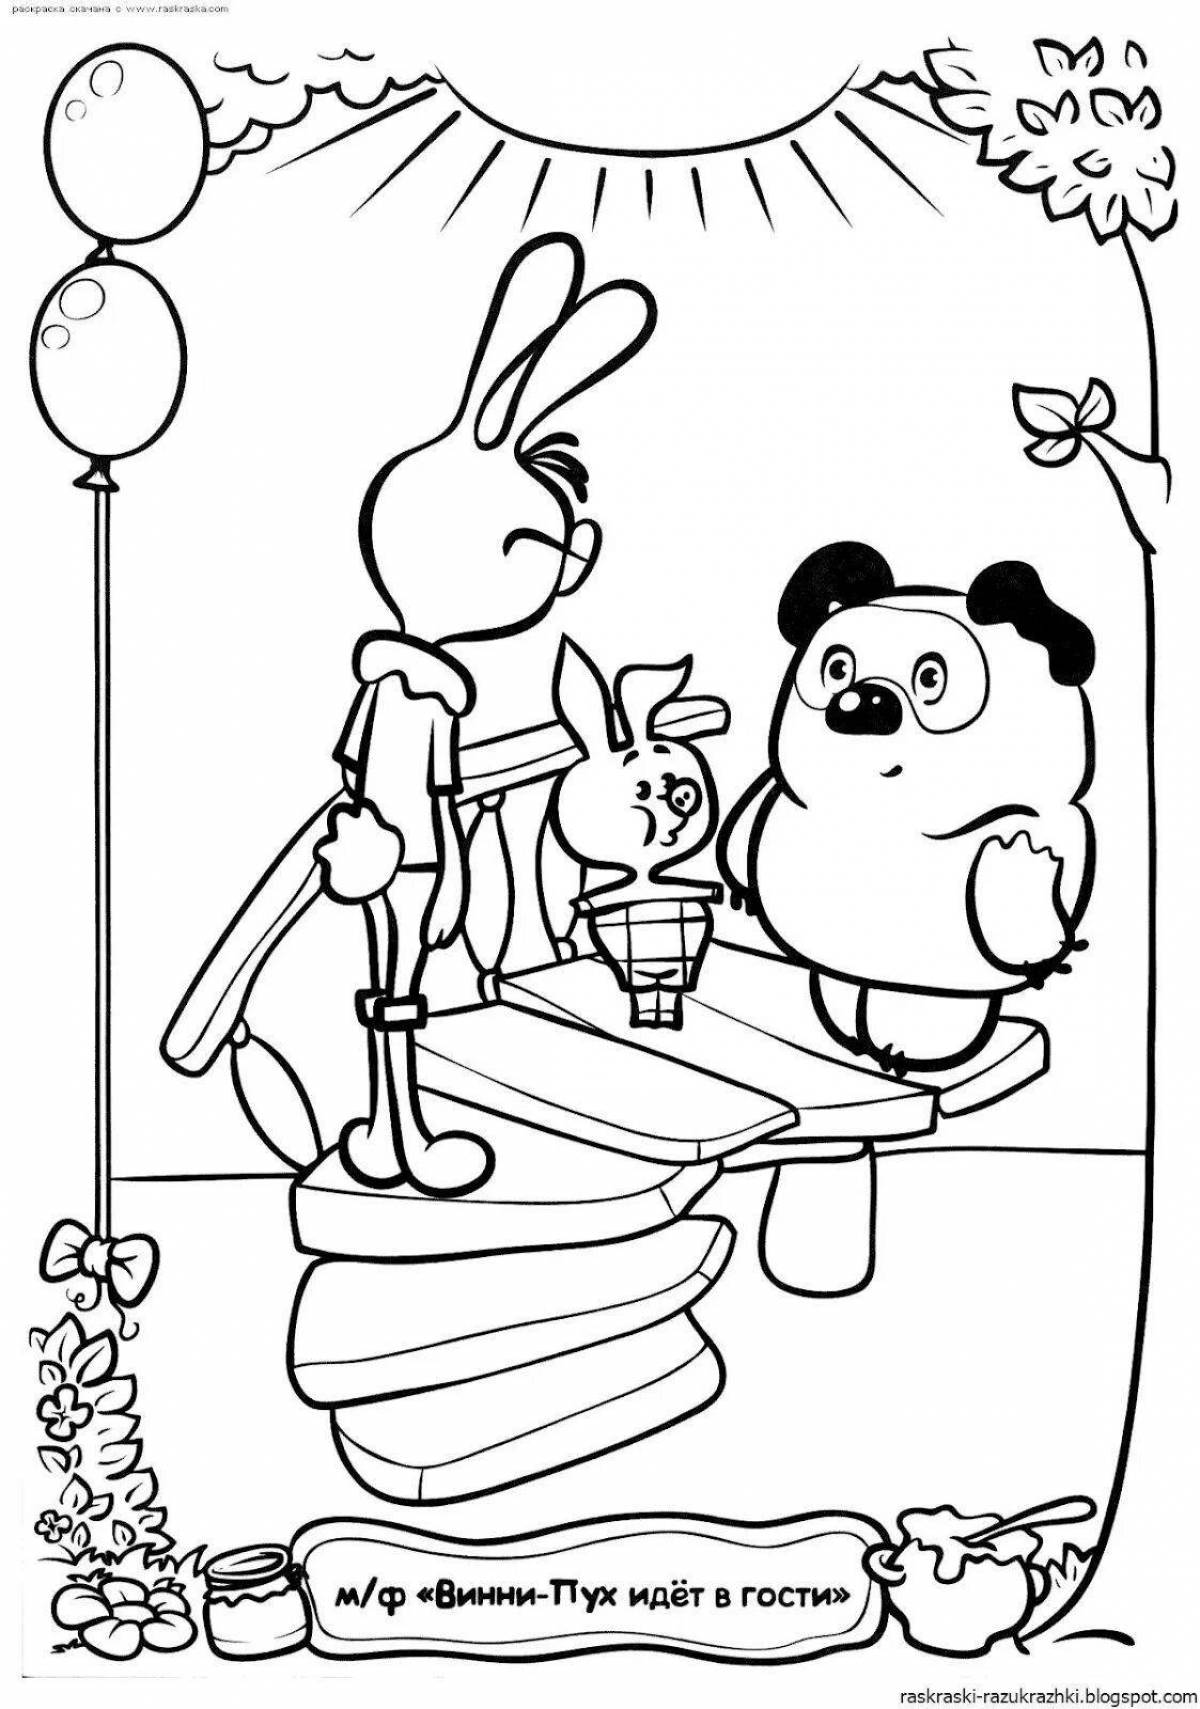 Winnie's amazing coloring page